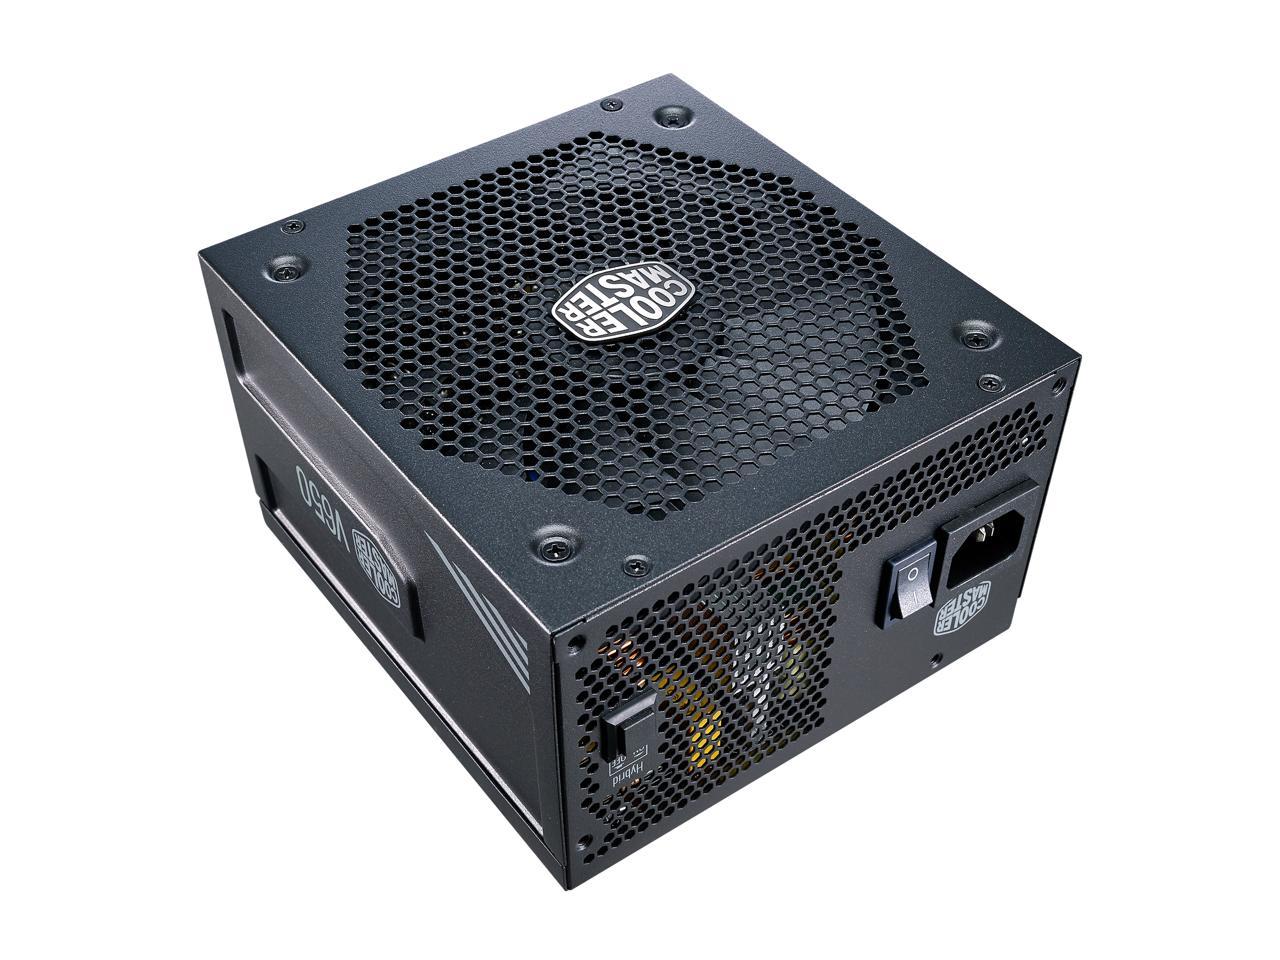 Cooler Master V650 Gold V2 Full Modular, 650W, 80+ Gold Efficiency, Semi-fanless Operation, 16AWG PCIe High-efficiency Cables, 10 Year Warranty